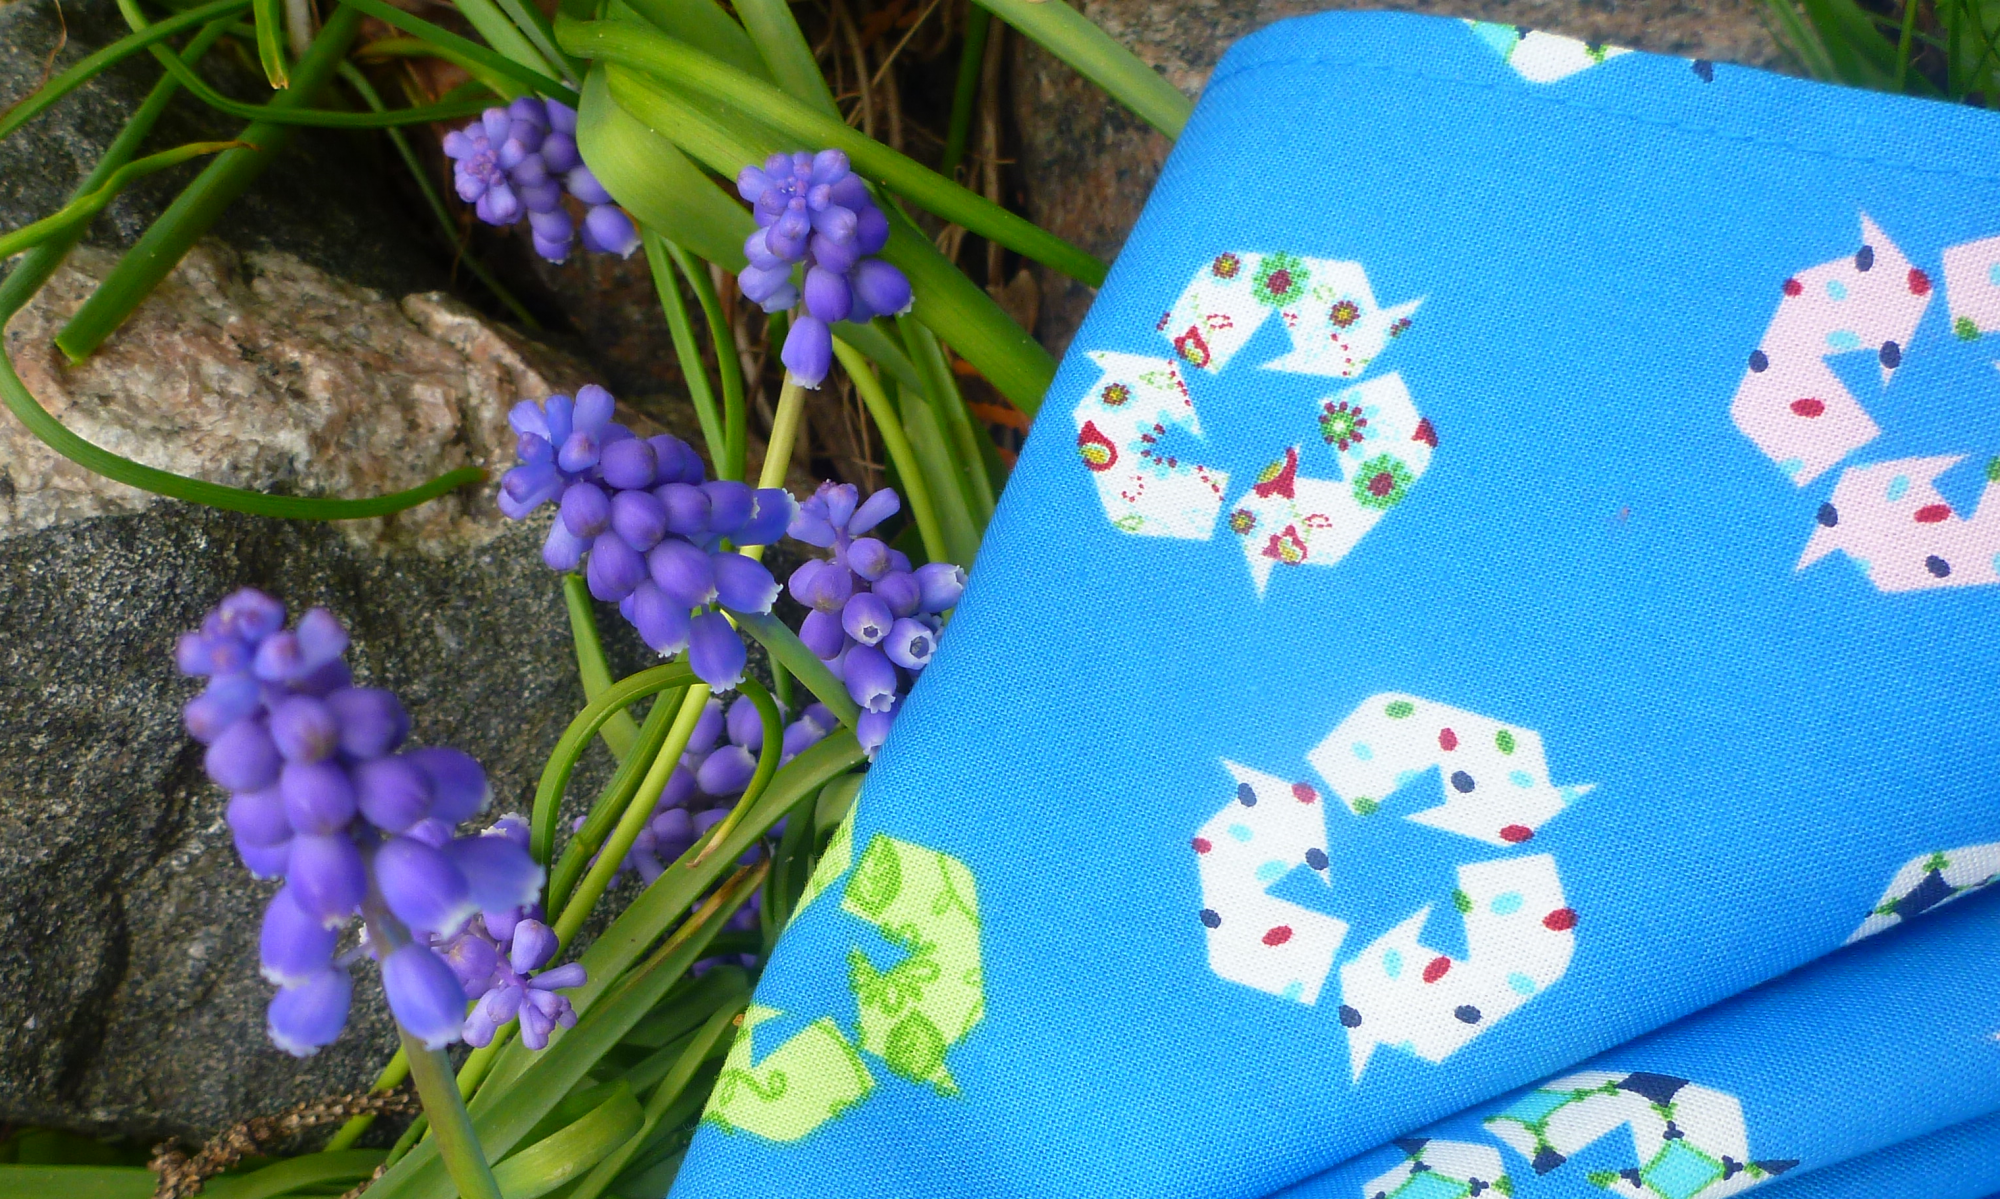 bright blue napkin with pattern of recycling logos, lying in grass with flowers.